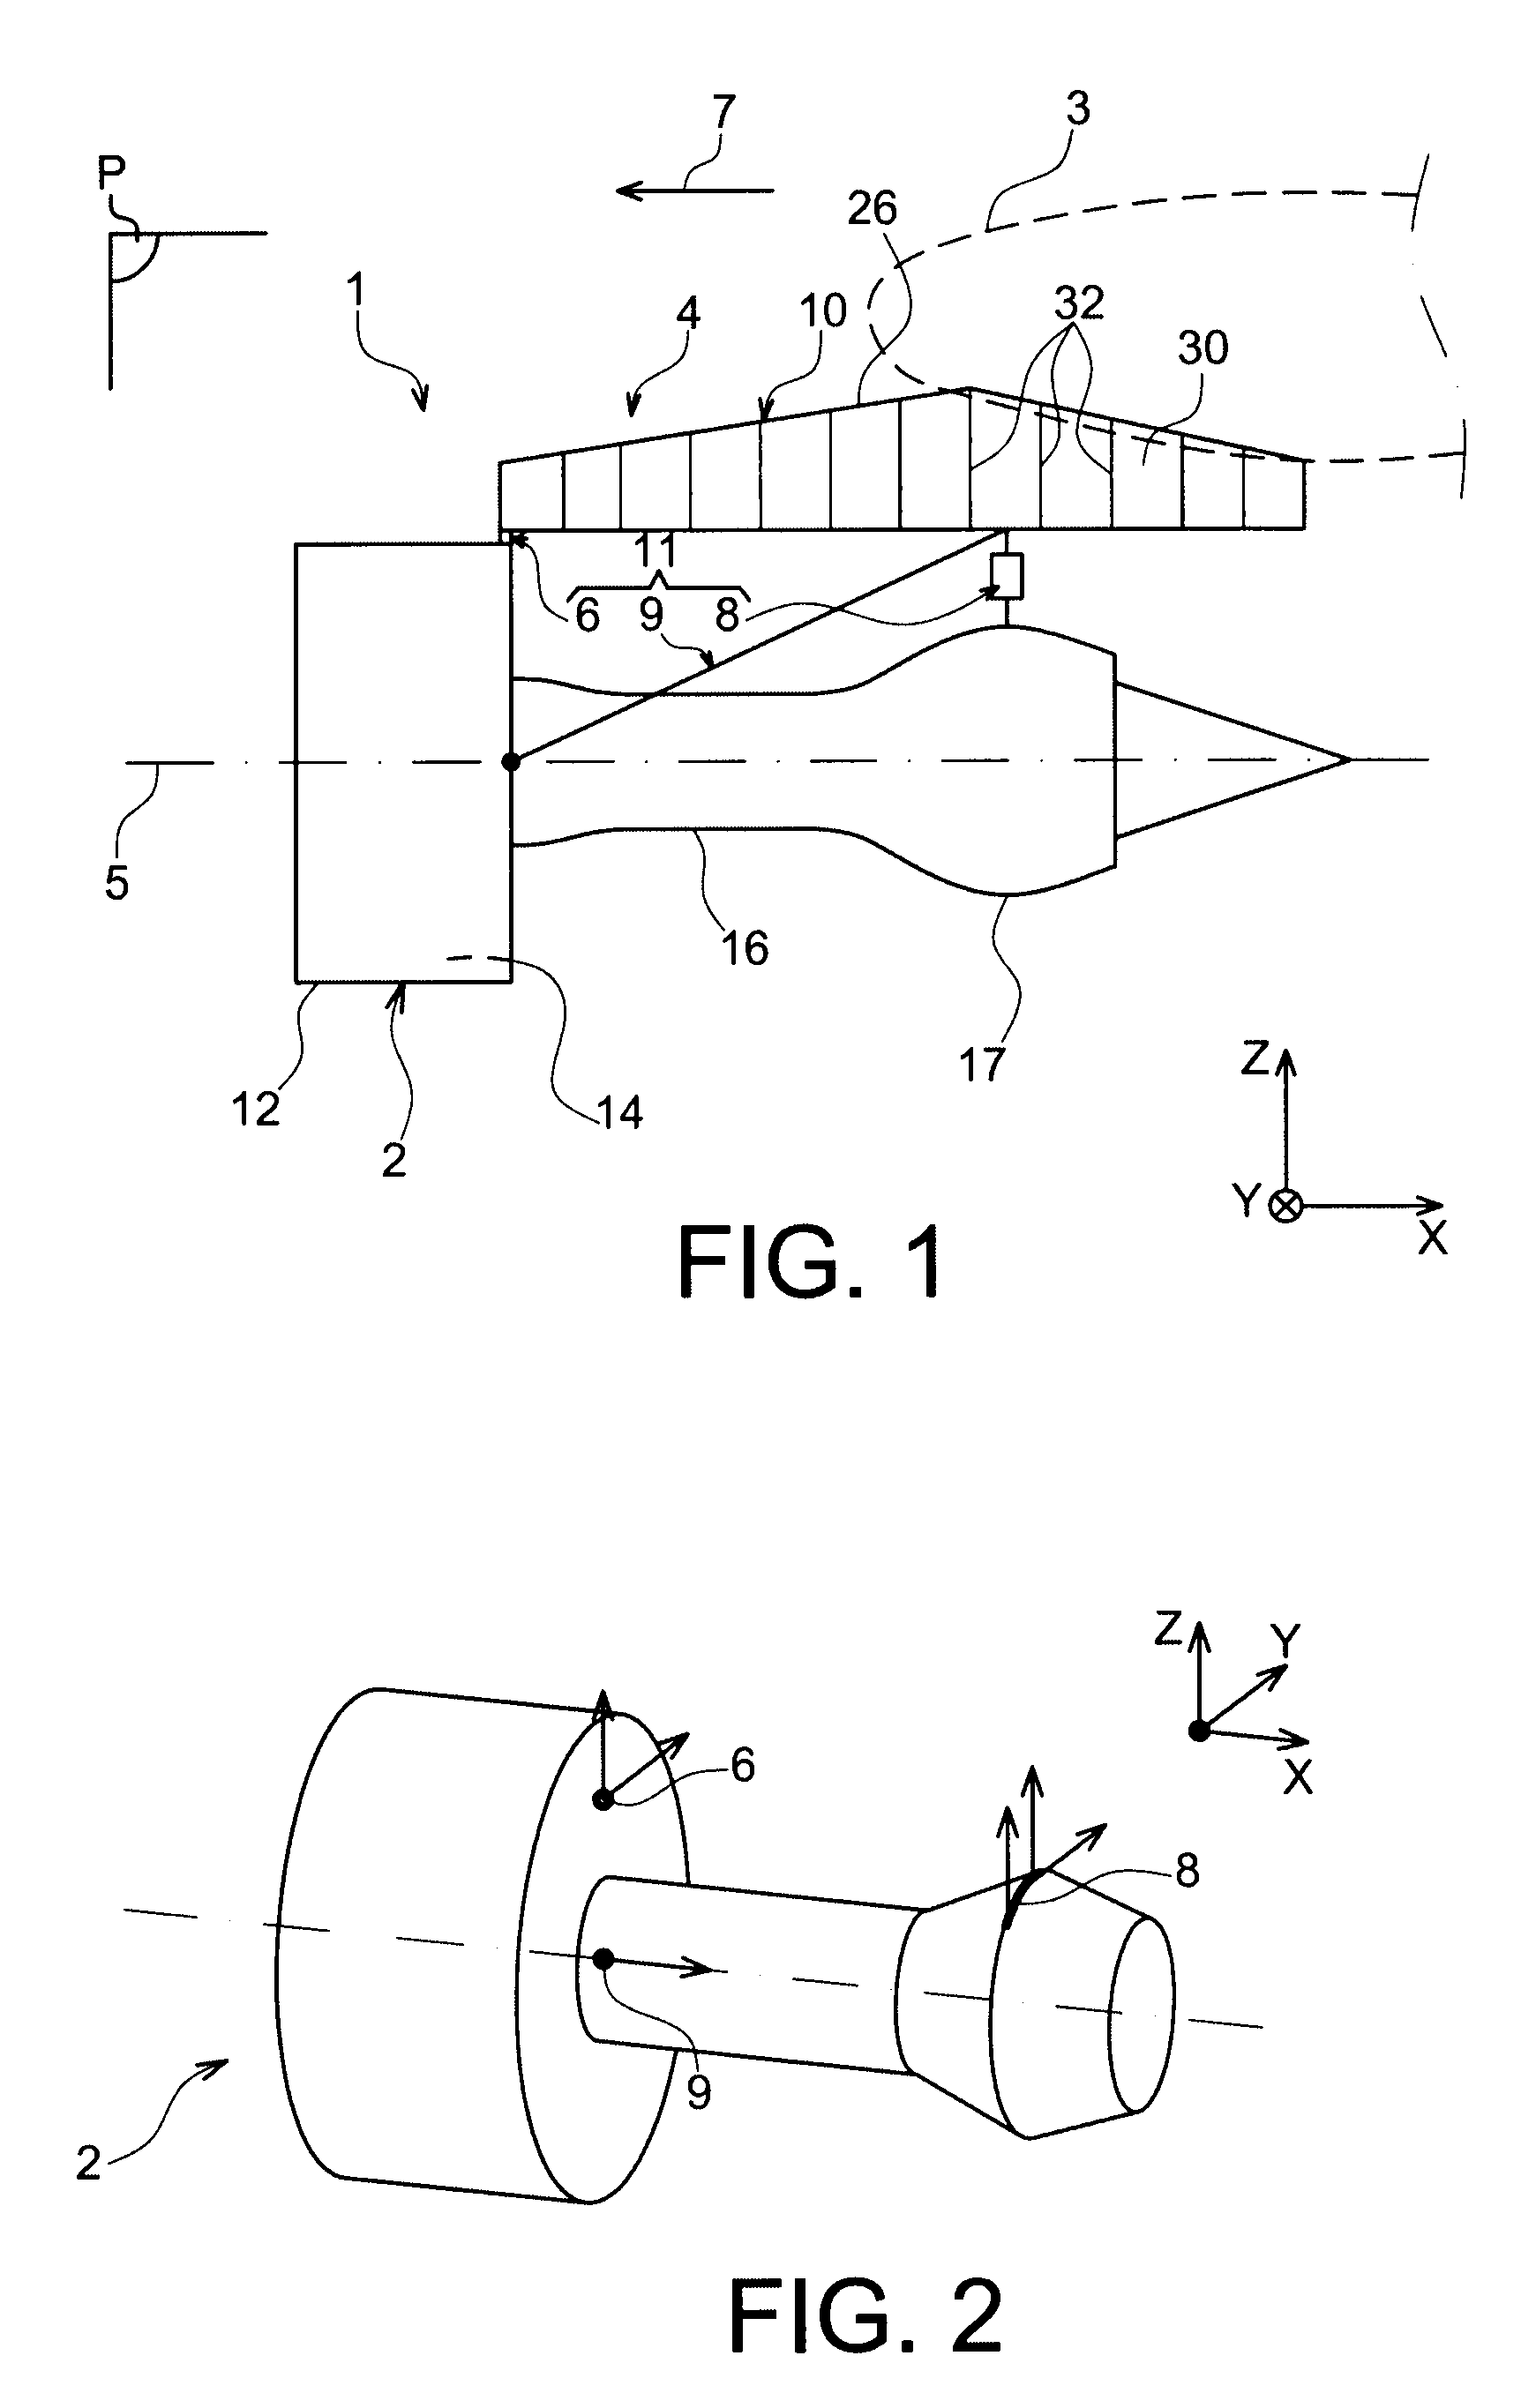 Aircraft engine attachment pylon having a rear engine attachment provided with a self-locking nut